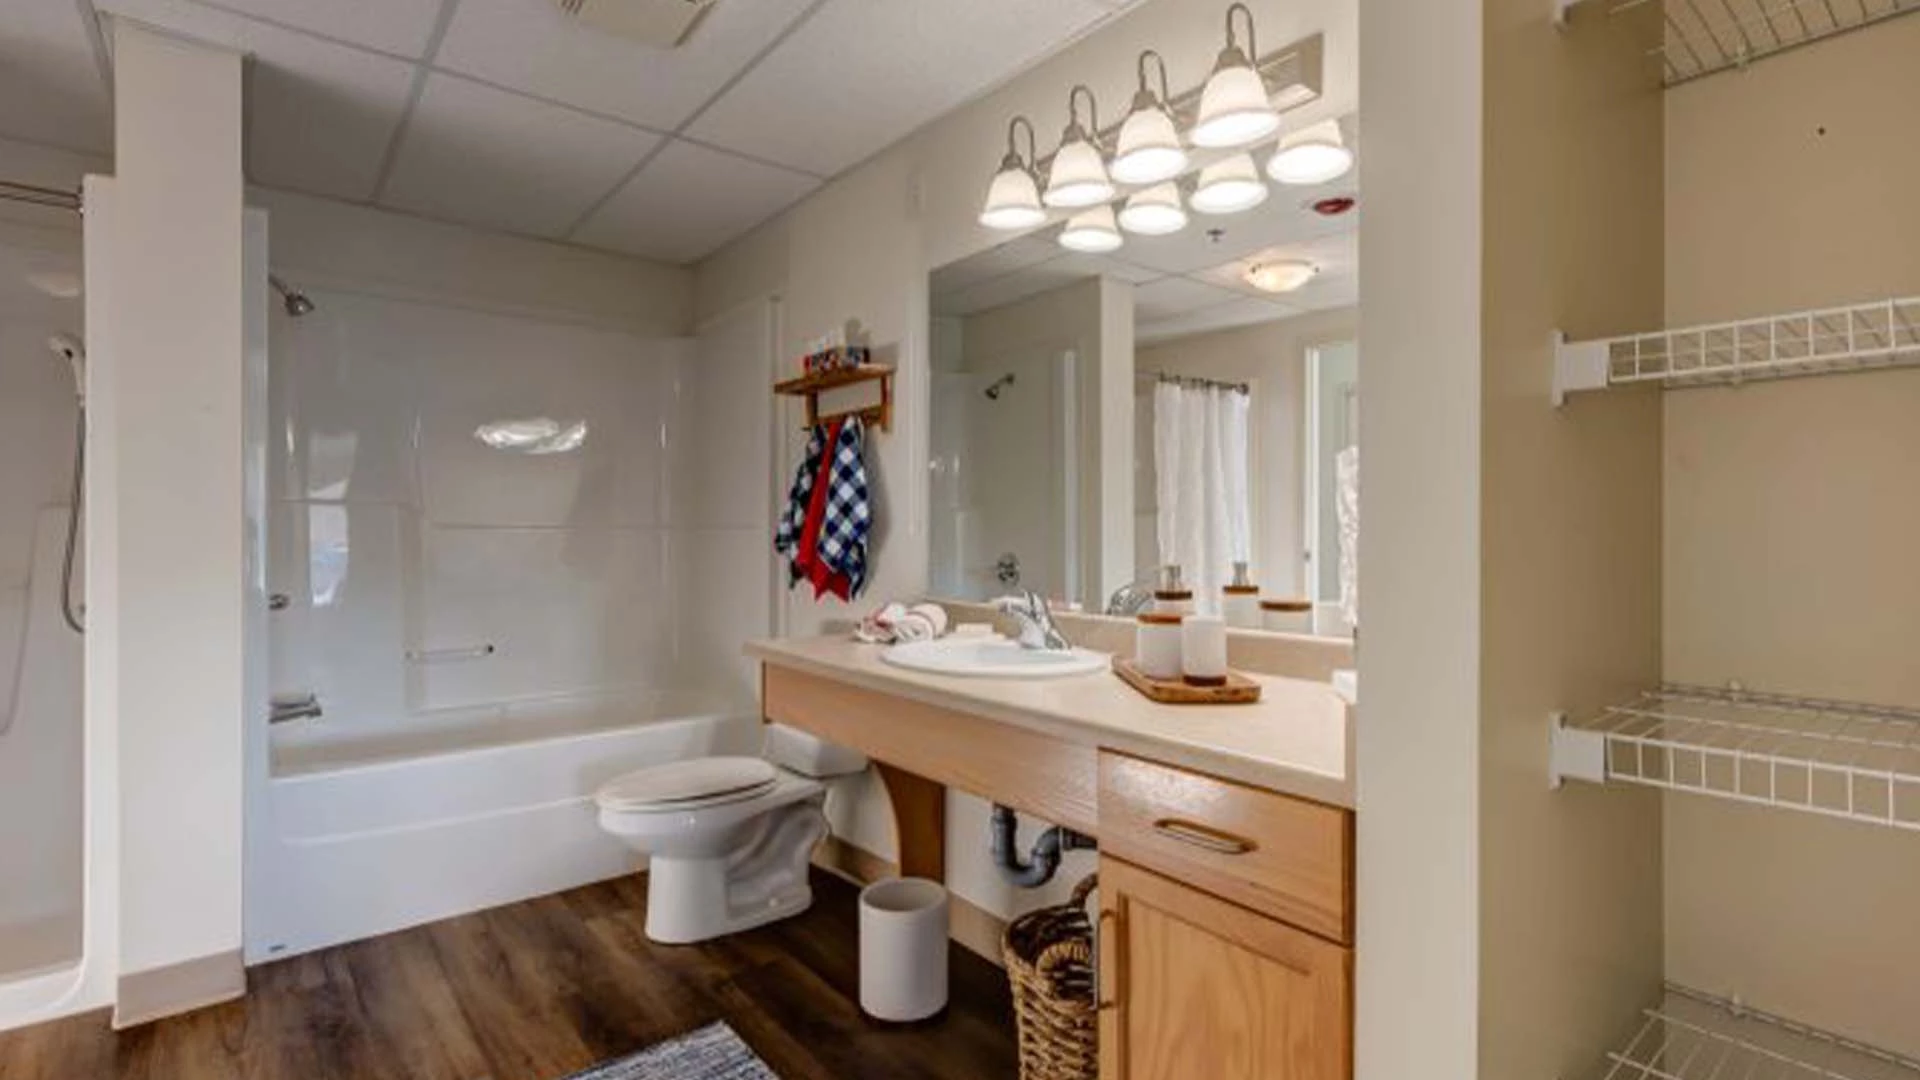 Bathroom in a suite at Summerwood Village Retirement home